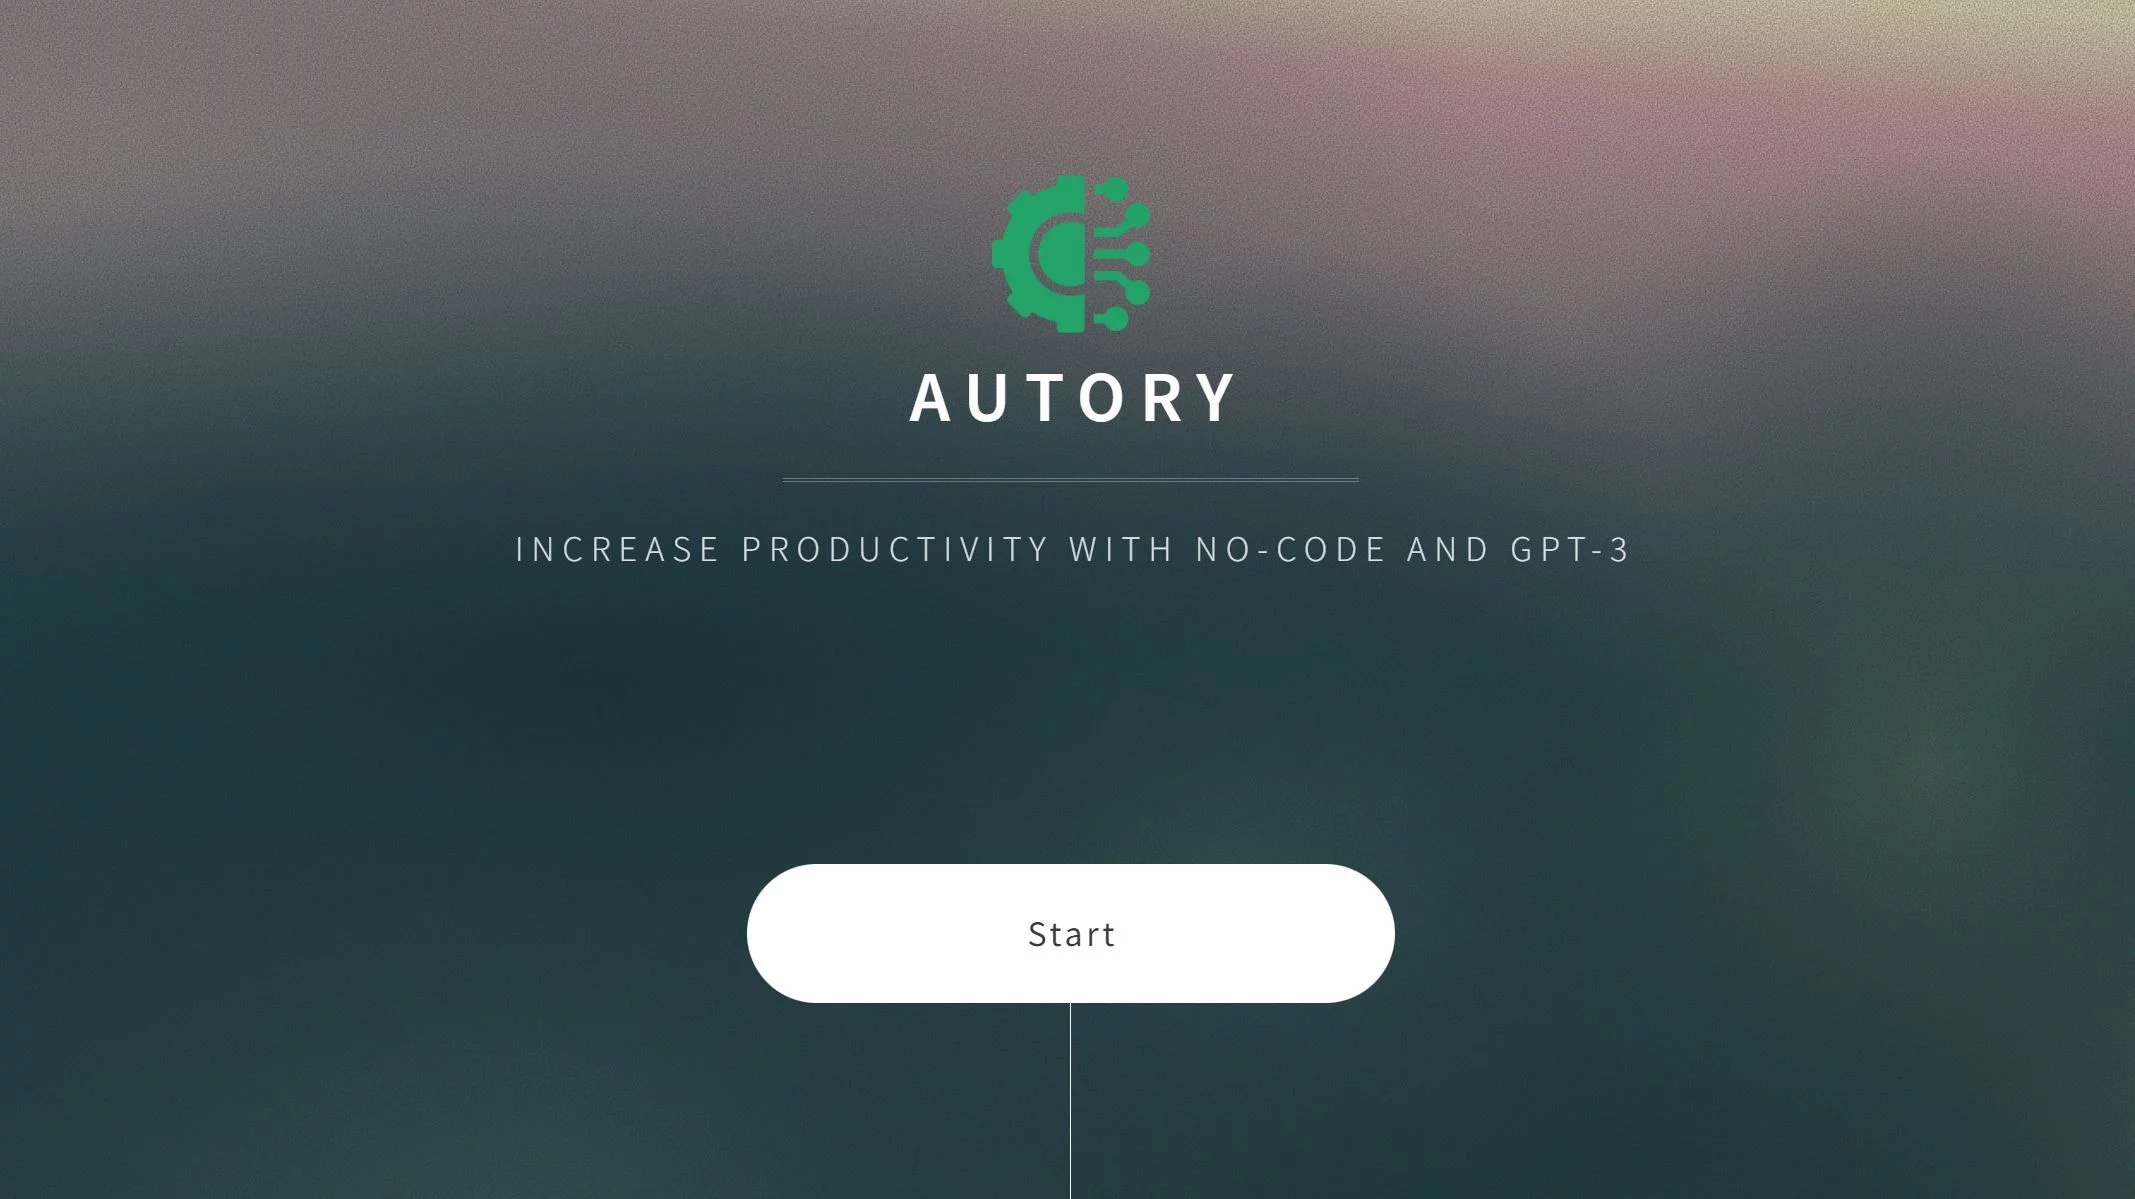  Increase productivity with no-code and GPT-3